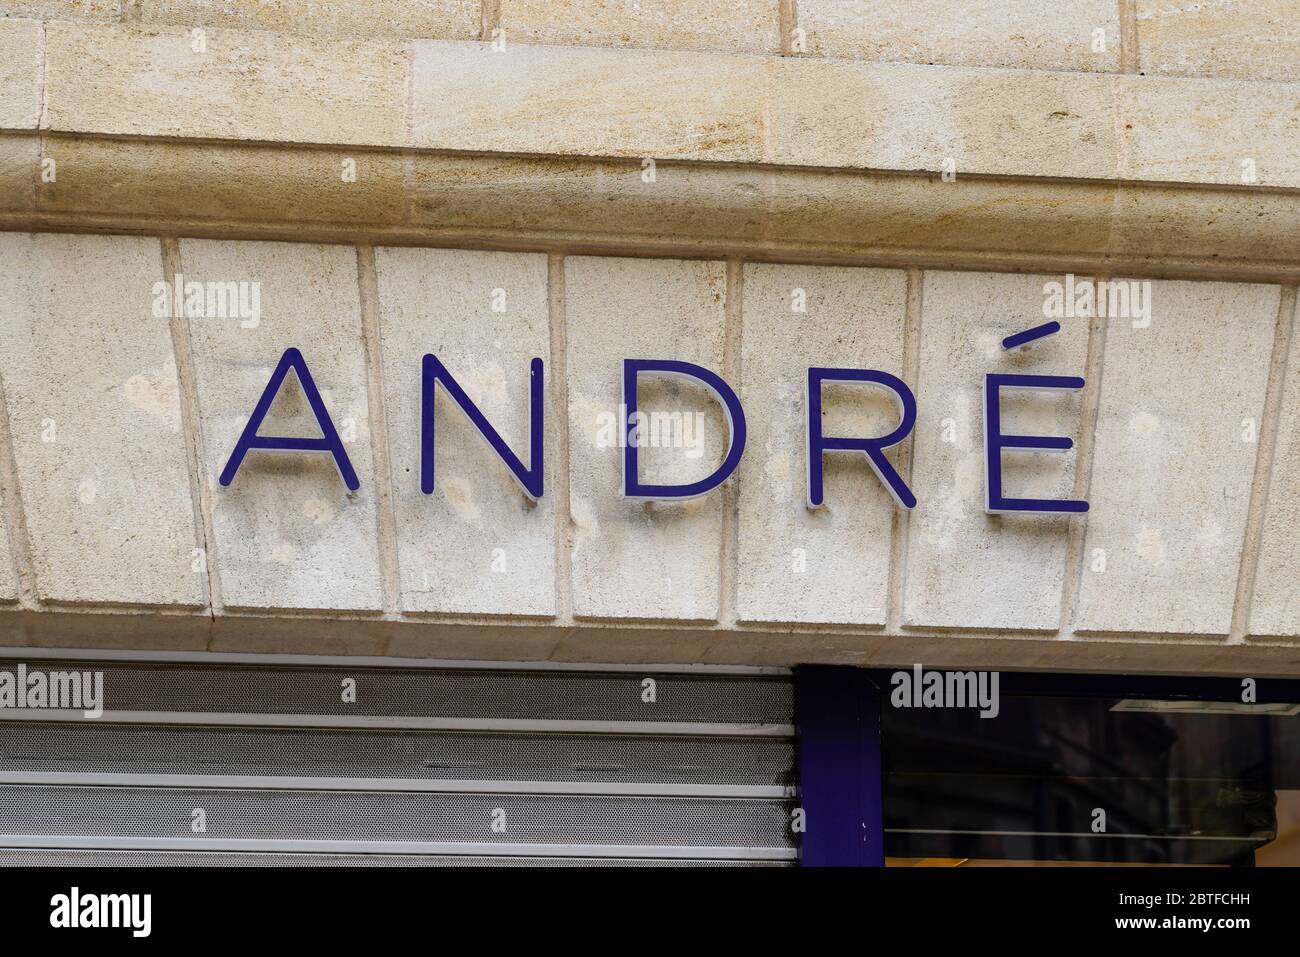 Bordeaux , Aquitaine / France - 05 05 2020 : Andre sign logo of shoes store  footwear retailer Stock Photo - Alamy